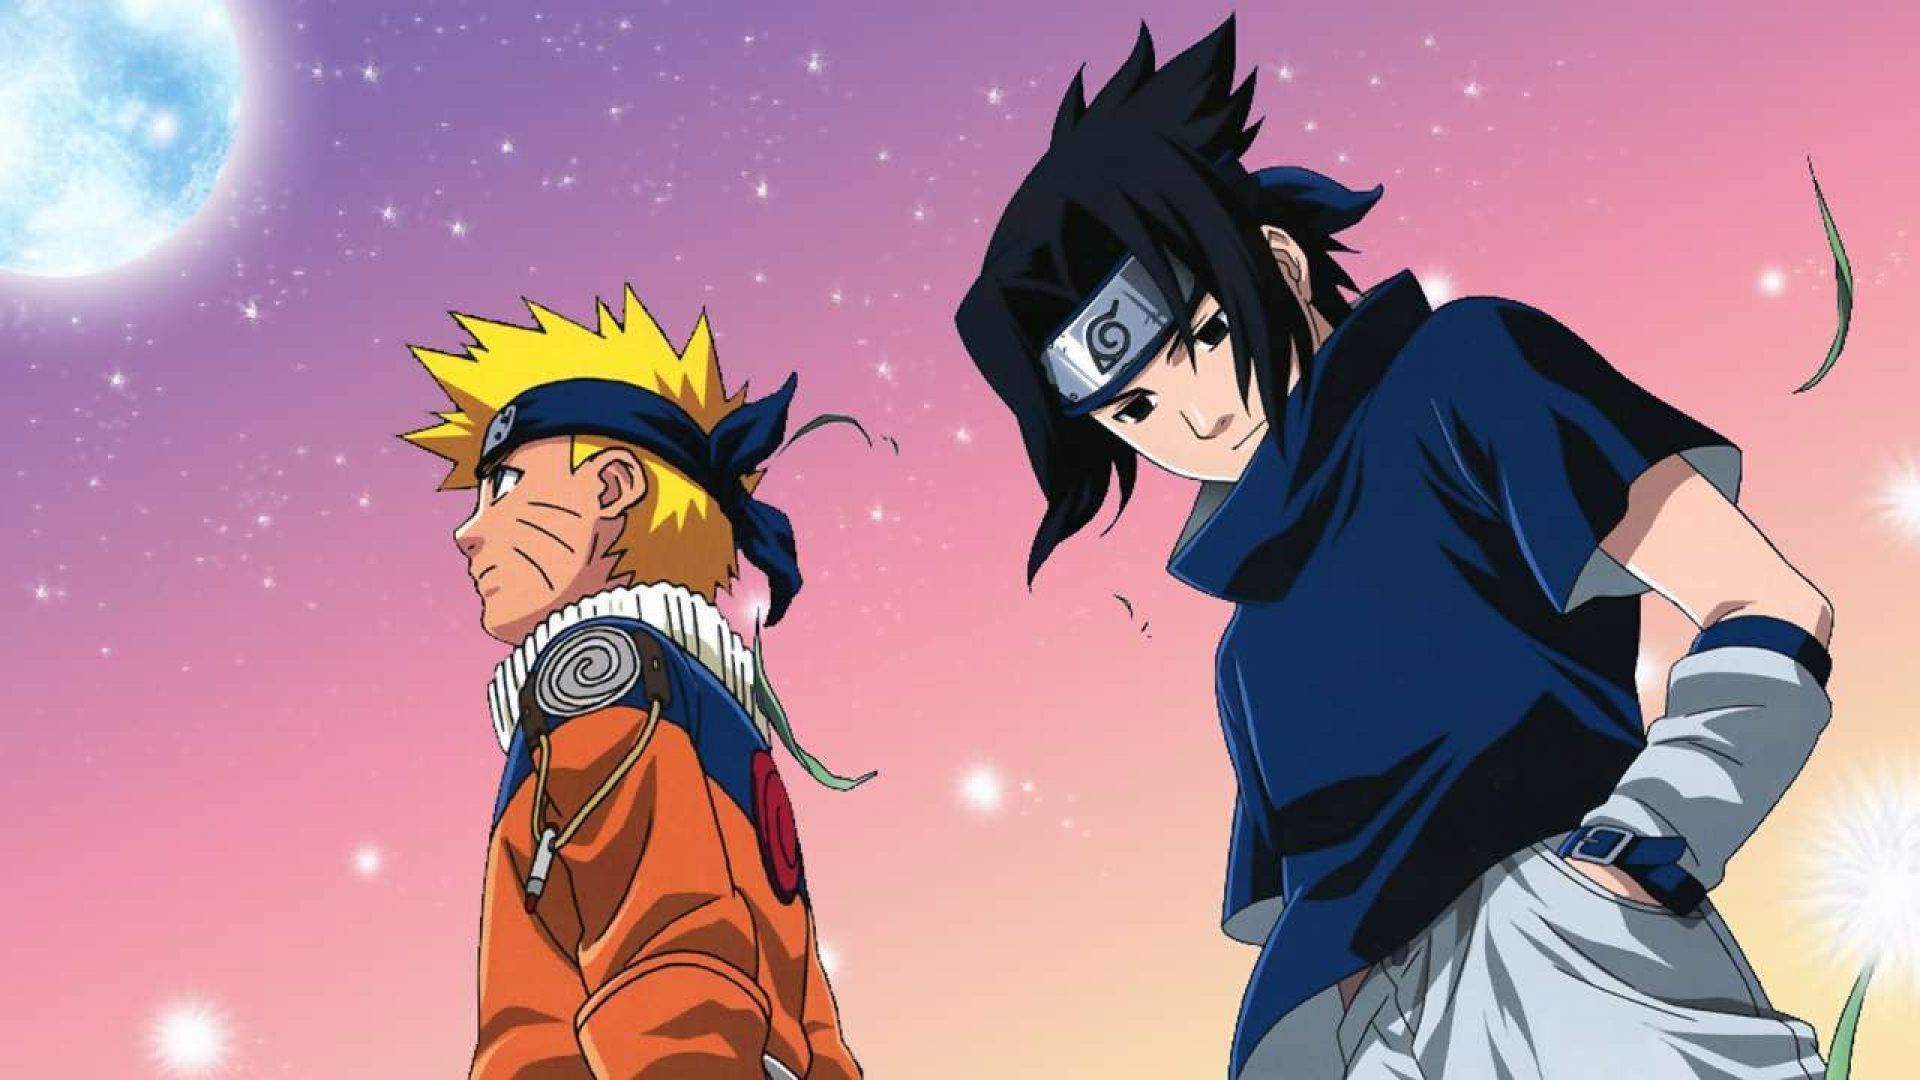 F*cking flaws in Naruto which were overlooked!